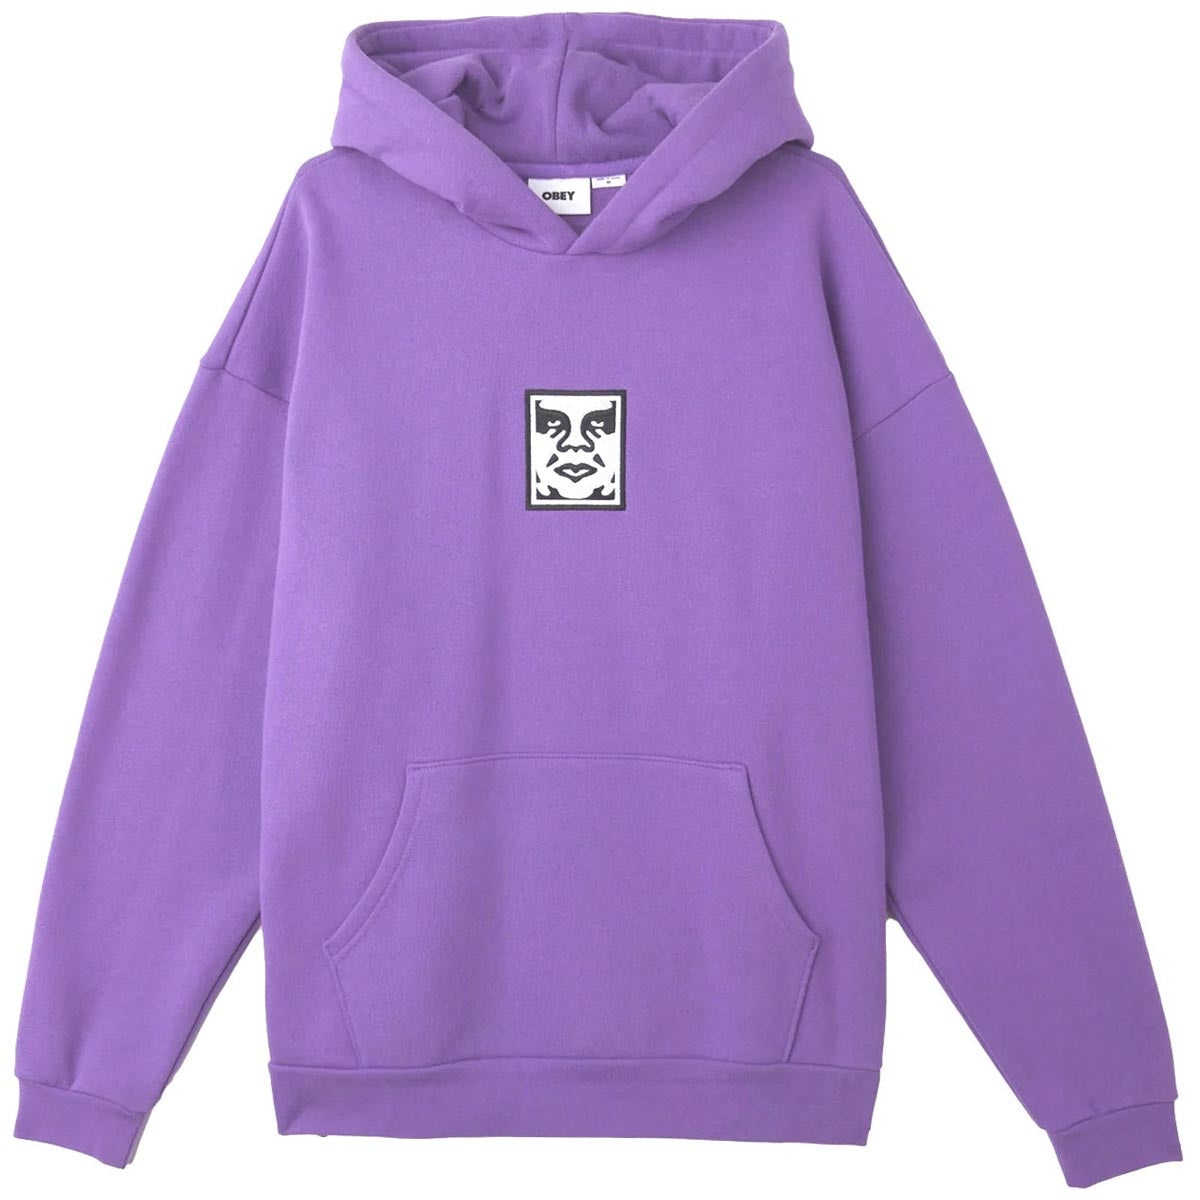 Obey Tbd Hoodie - Passion Flower image 2